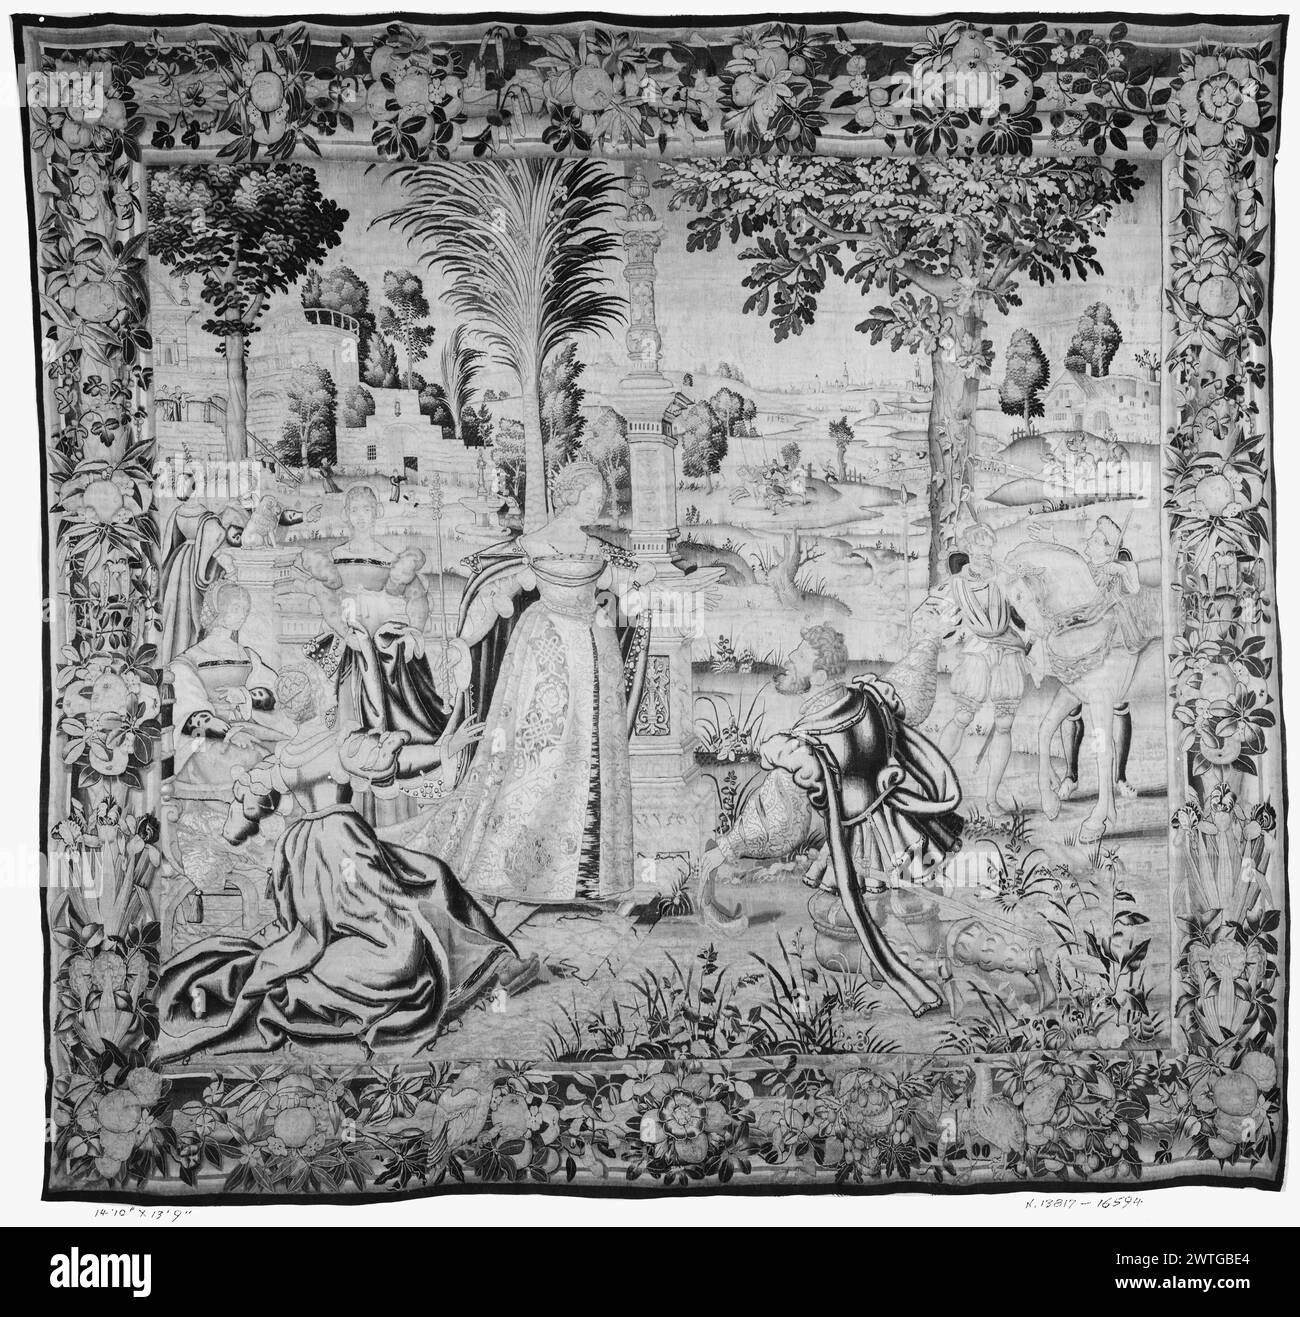 Queen Tomyris receives message from Cyrus. unknown c. 1535-1550 Tapestry Dimensions: H 13'9' x W 14'10' Tapestry Materials/Techniques: unknown Culture: Flemish Weaving Center: Brussels Ownership History: French & Co. received from Joseph Brummer, invoiced 5/25/1929; returned 5/3/1932 [SS. 16594]. French & Co. received from Mrs. Edith Strauss 10/29/1947; returned 10/21/1963 [SS 79357]. Queen Tomyris stands at steps of her palace (L of center, foreground); Cyrus' messenger kneels before her (R of center, foreground); 3 ladies-in-waiting, couple stands talking (L, middle ground); 2 men wait near Stock Photo